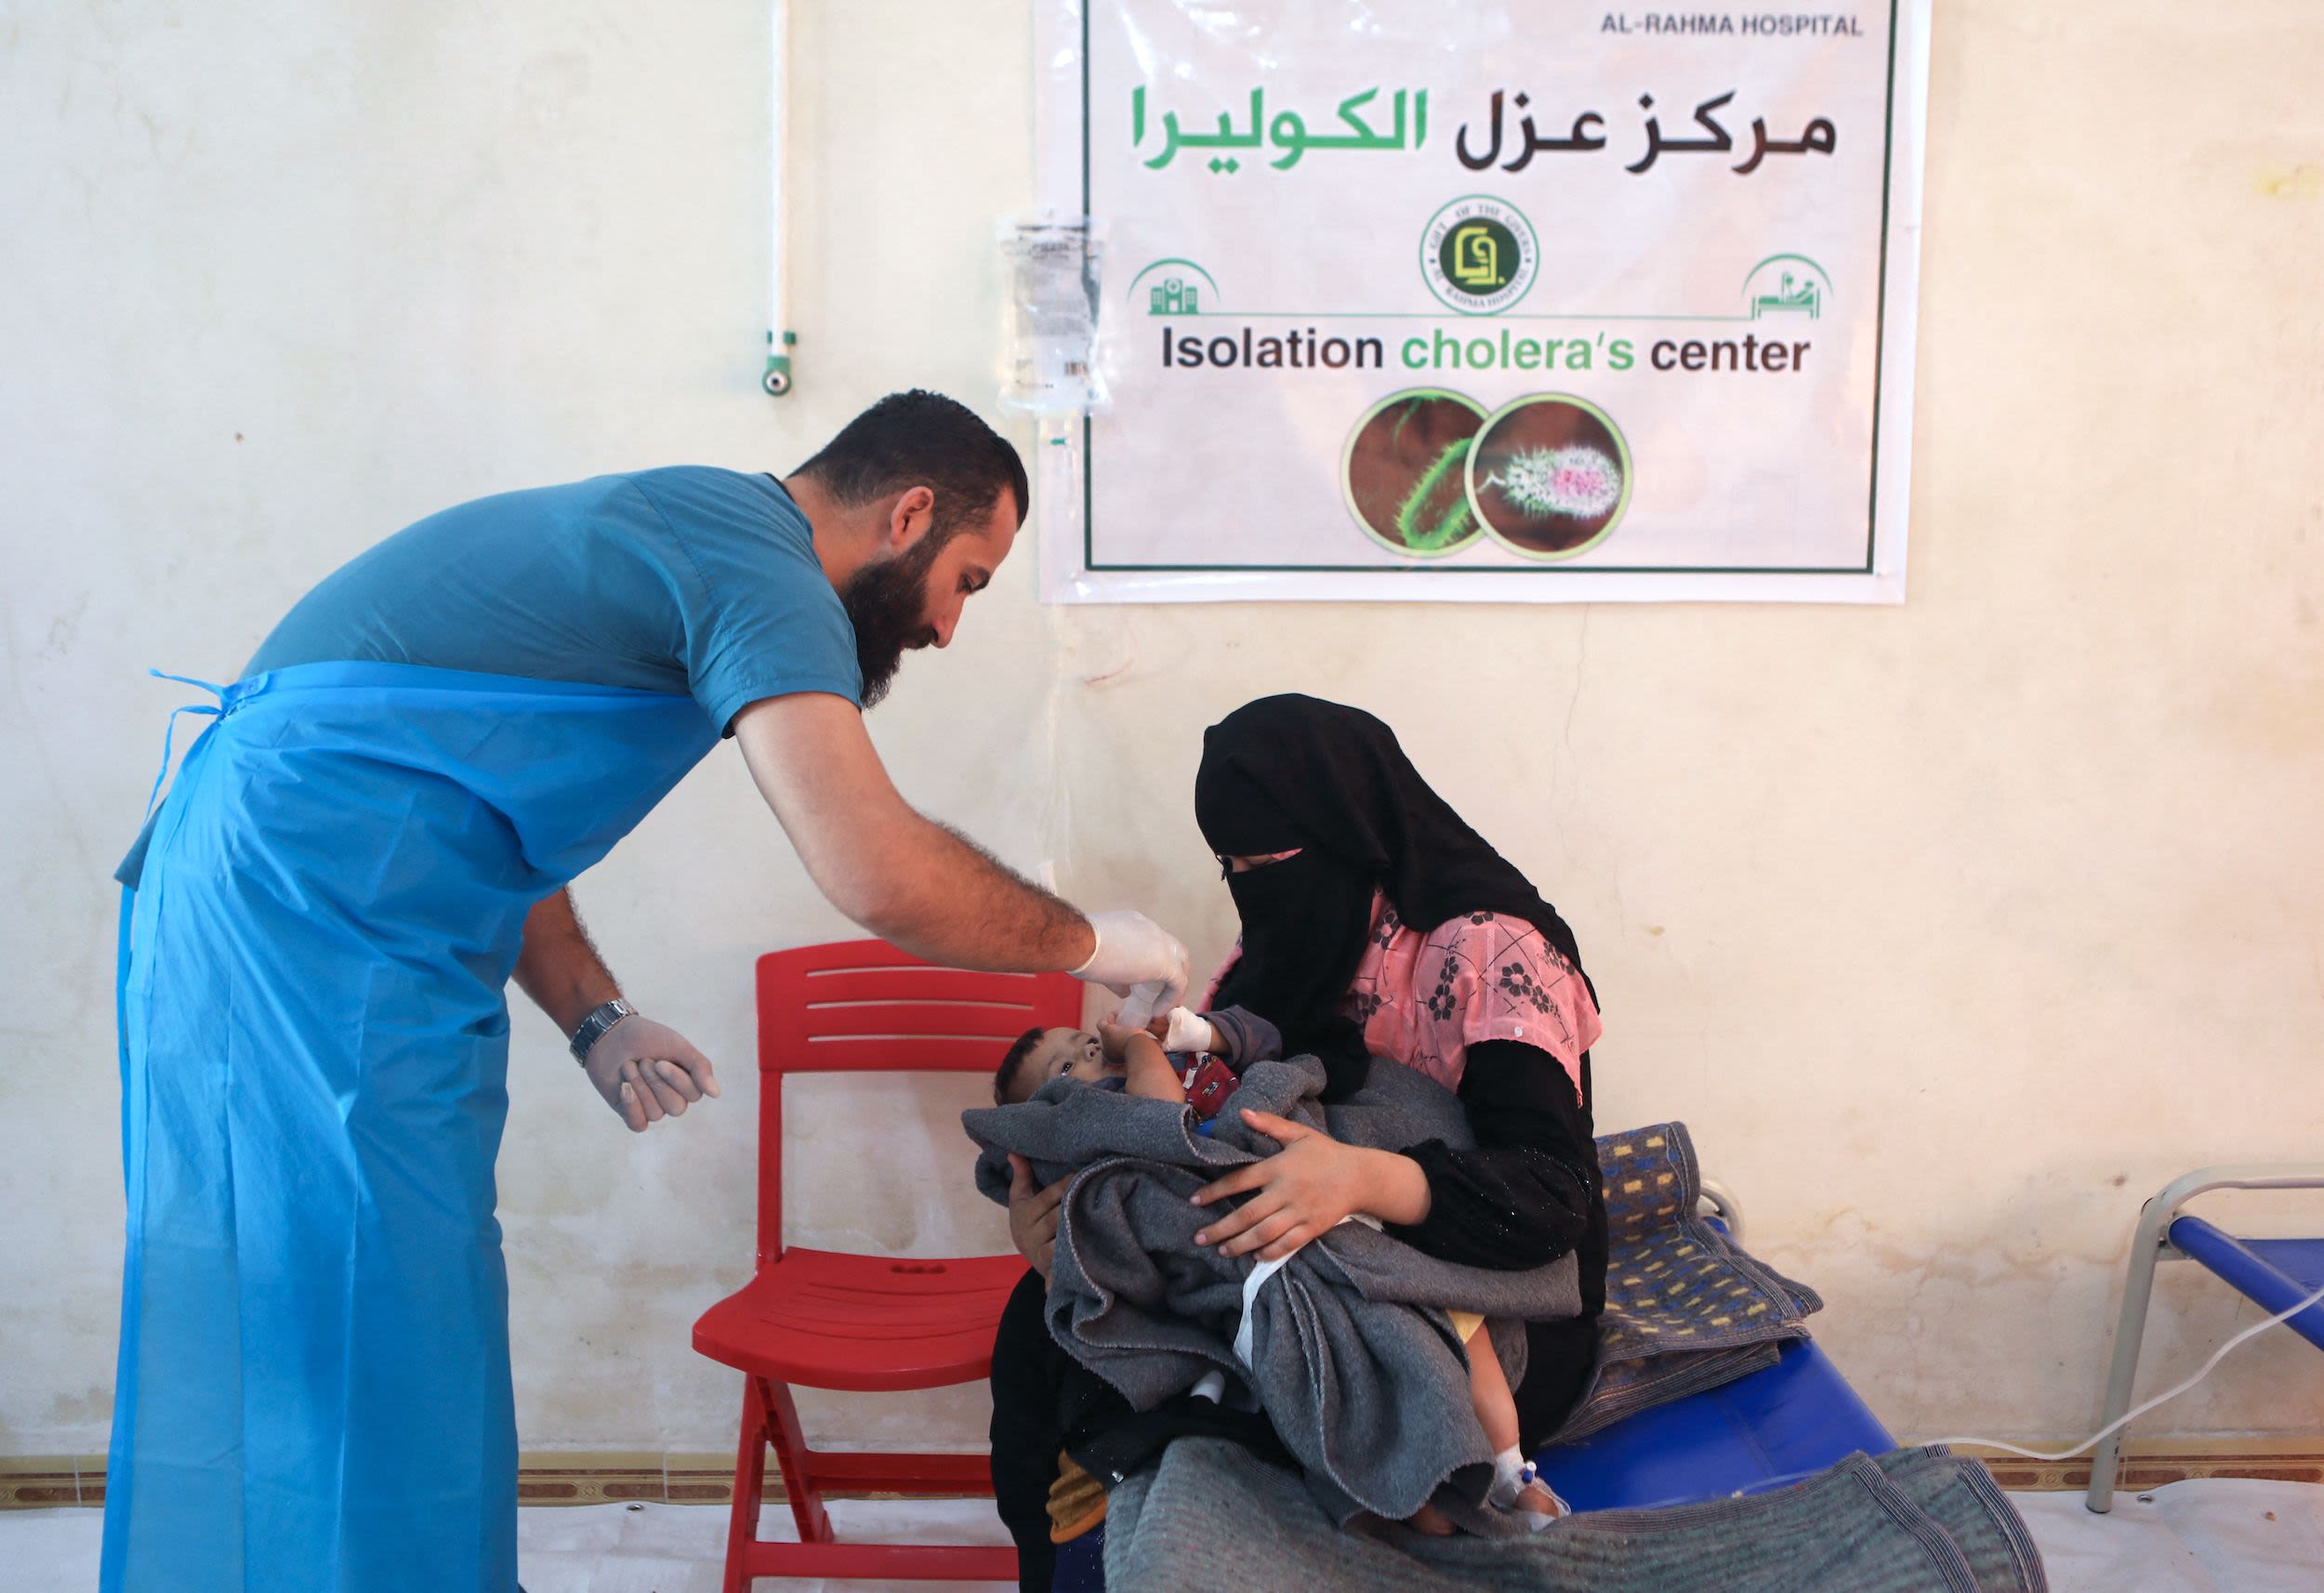 A medic treats a baby brought by his mother at a recently-opened medical center for Cholera cases in the Syrian town of Darkush, on the outskirts of the rebel-held northwestern province of Idlib, on October 22, 2022. - The disease is making its first major comeback since 2009 in Syria, where nearly two-thirds of water treatment plants, half of pumping stations and one-third of water towers have been damaged by more than a decade of war, according to the United Nations. (Photo by Aaref WATAD / AFP) 